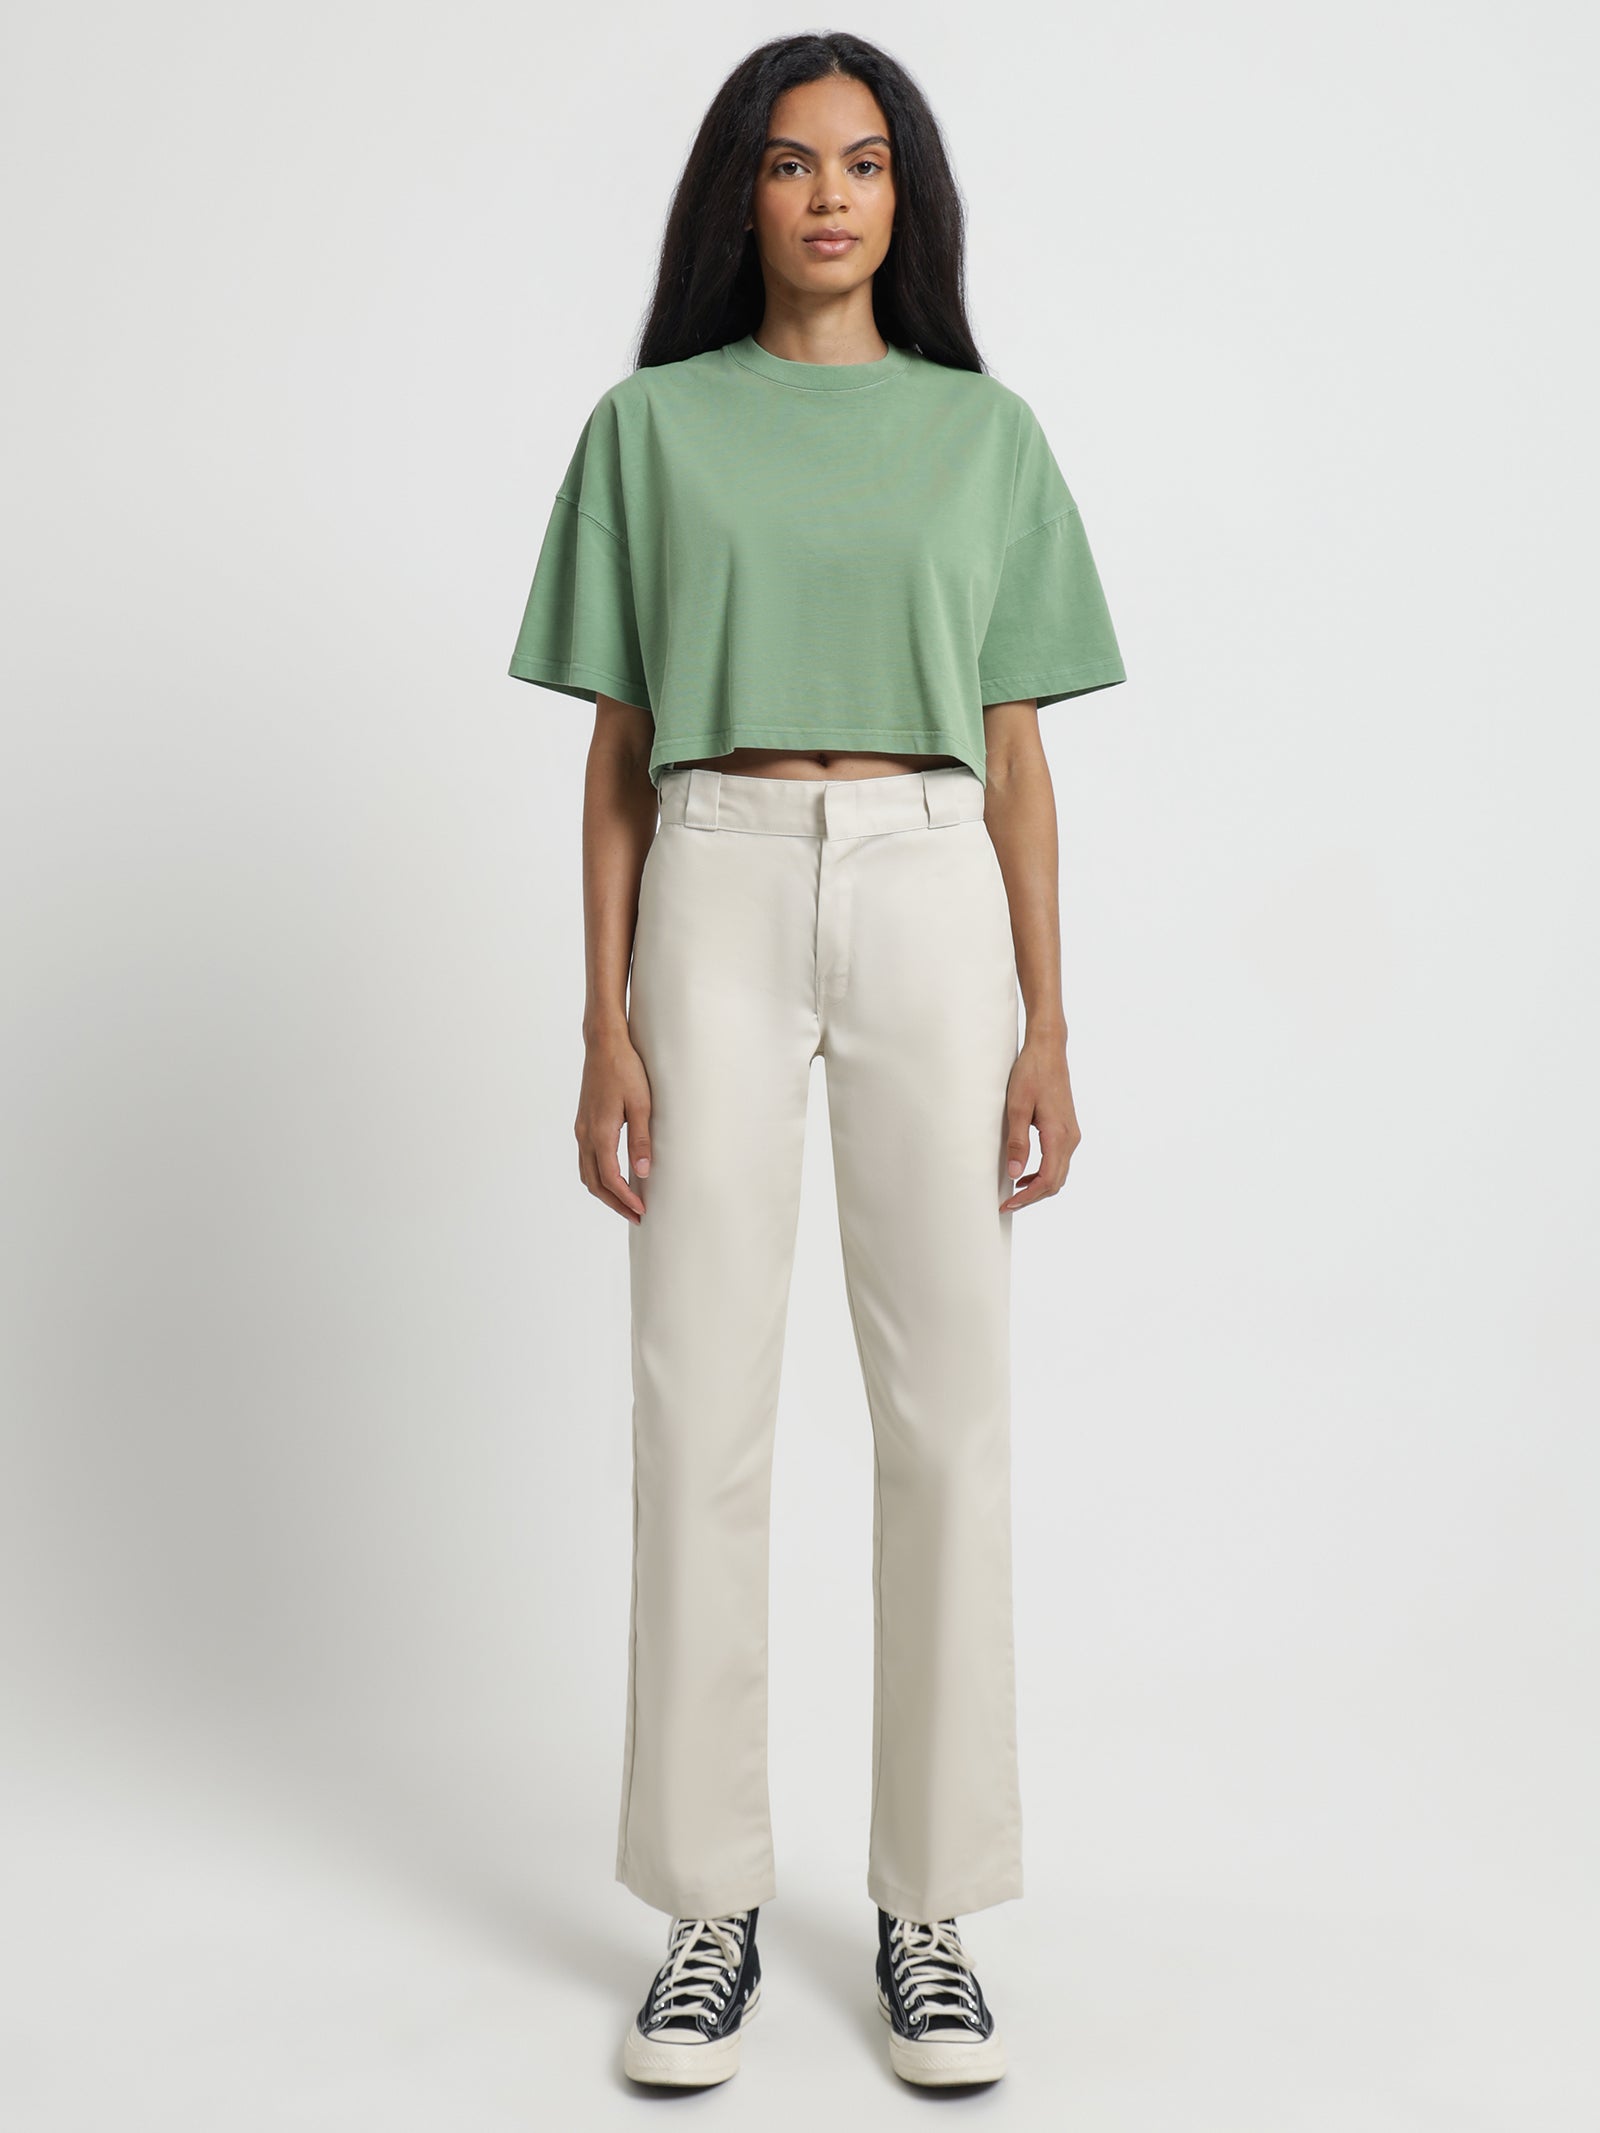 330 Cropped T-Shirt in Jade Green - Glue Store